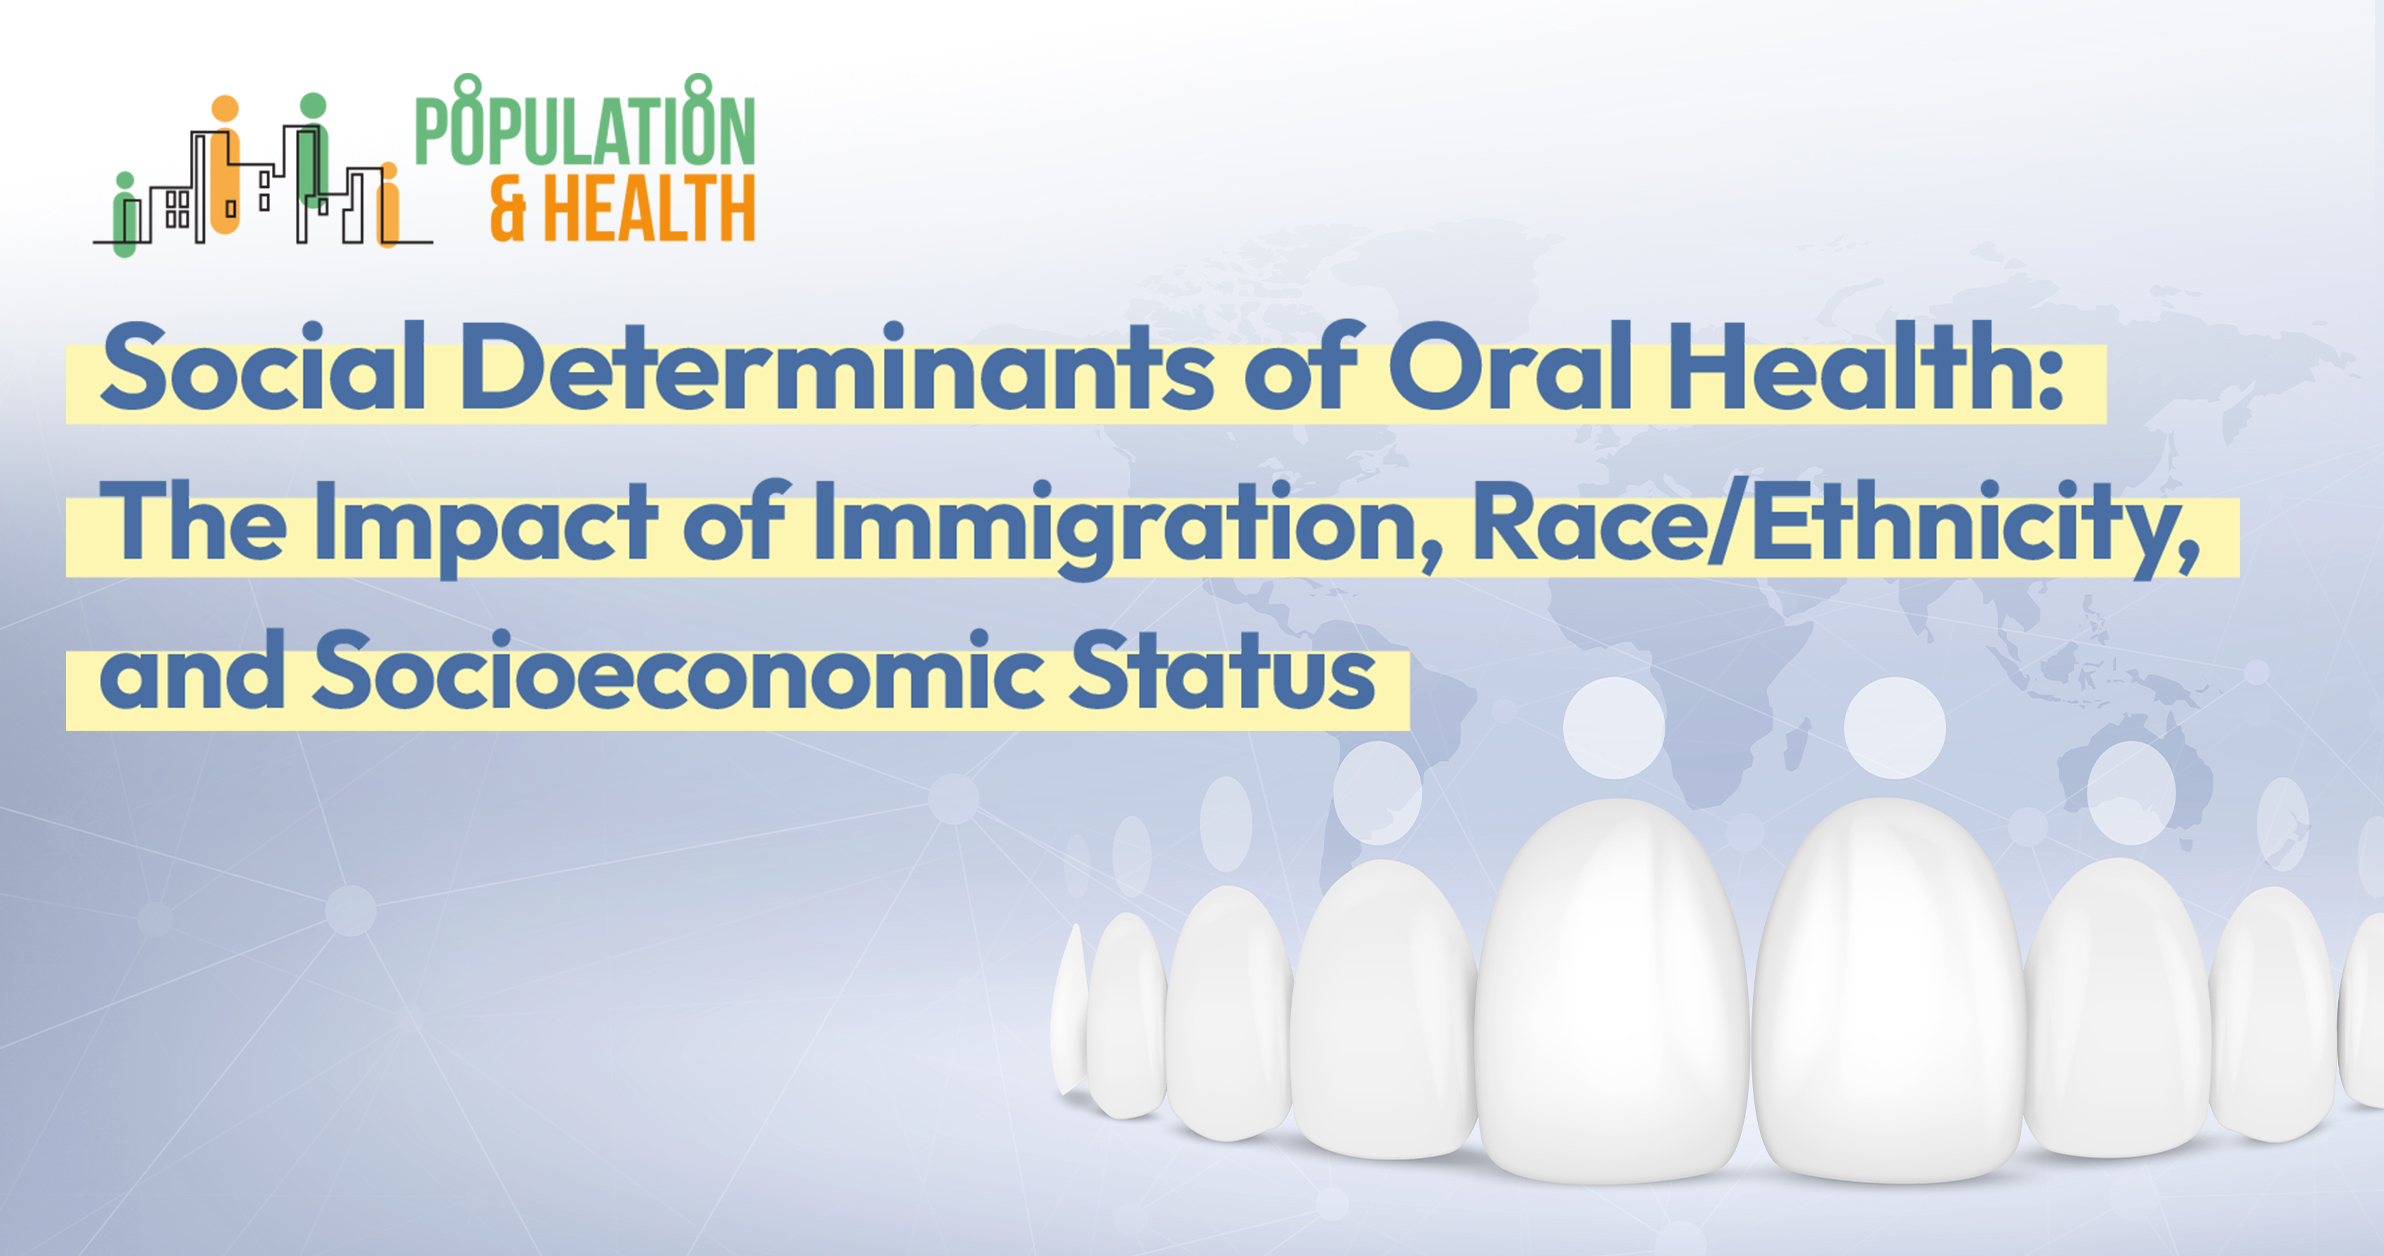 Population & Health Seminar: Social Determinants of Oral Health: The Impact of Immigration, Race/Ethnicity, and Socioeconomic Status